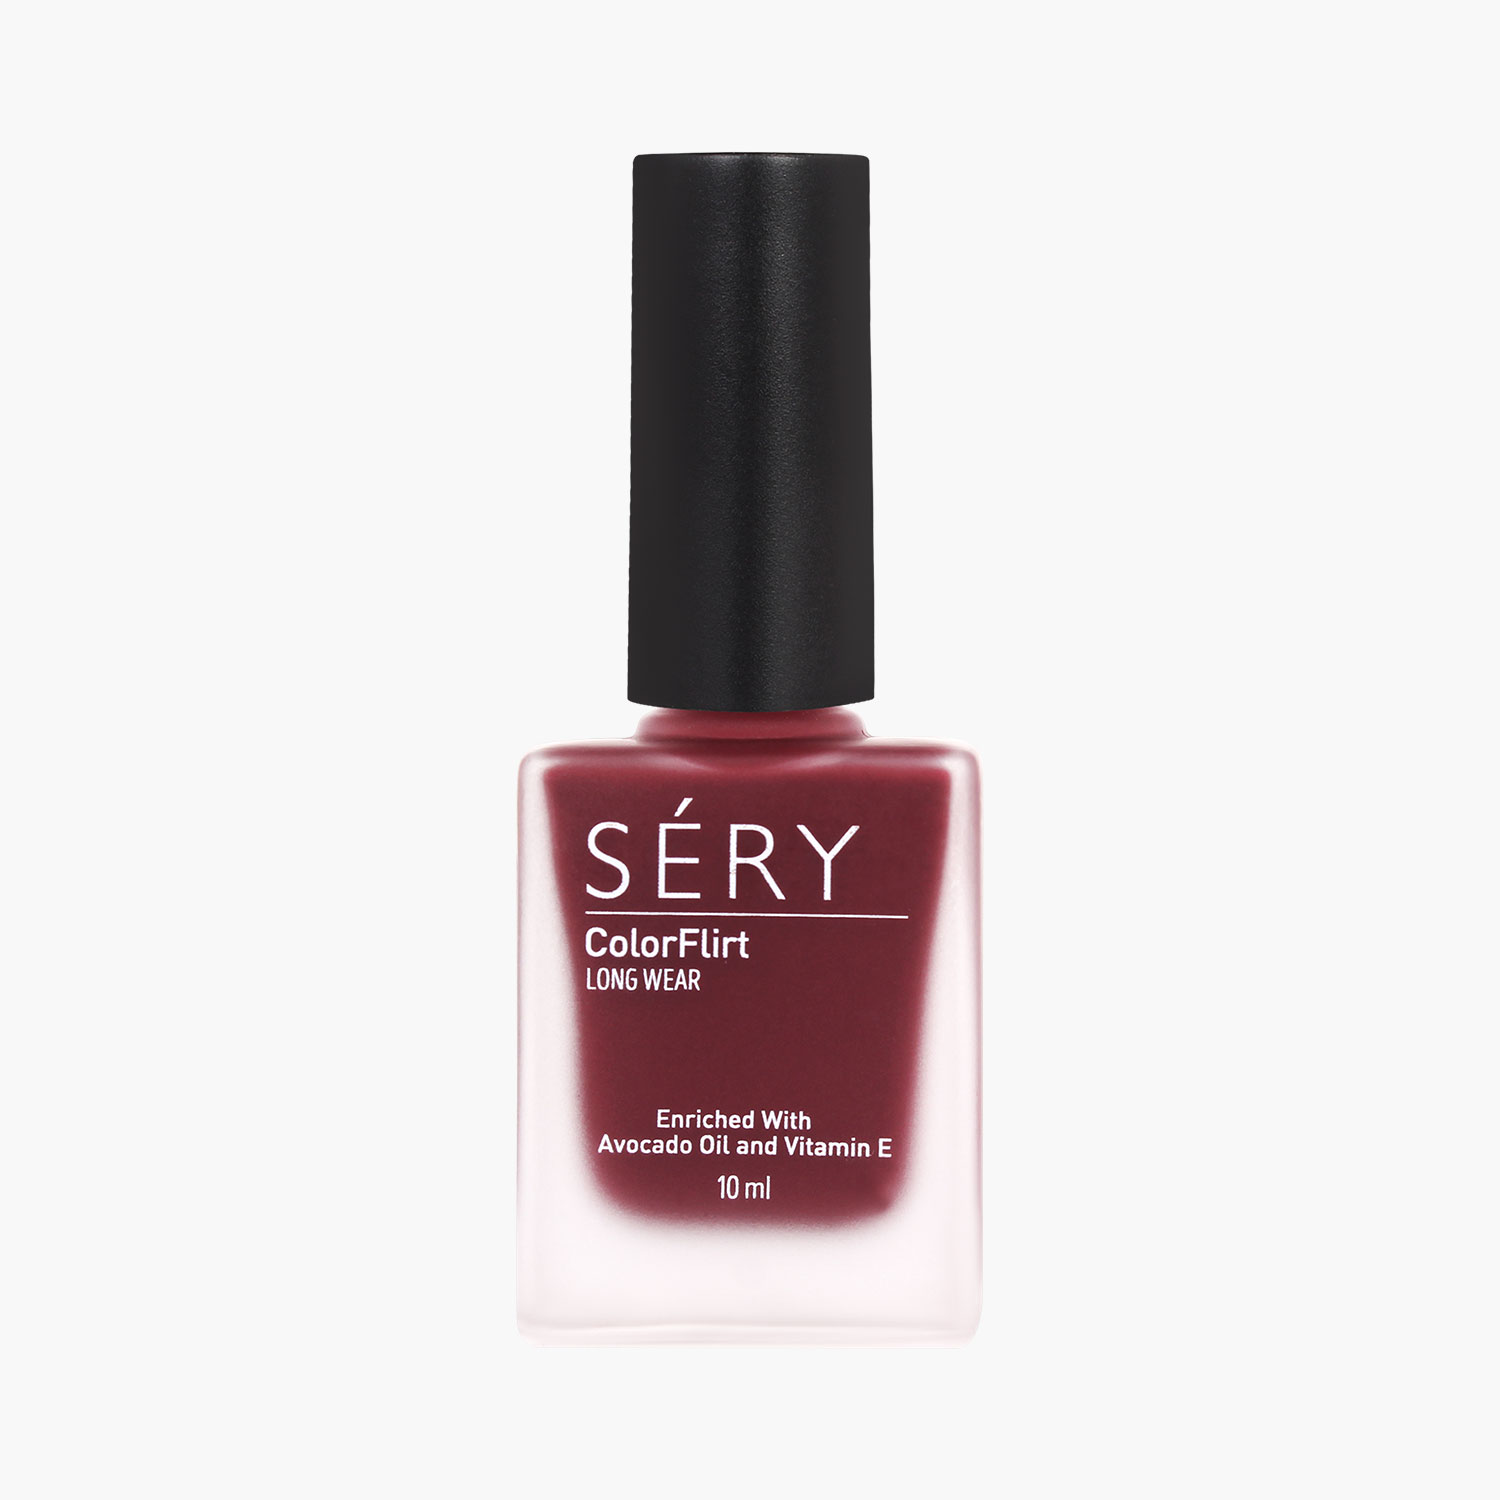 Make Your Manicure The Talk Of The Town With These Matte Nail Polishes